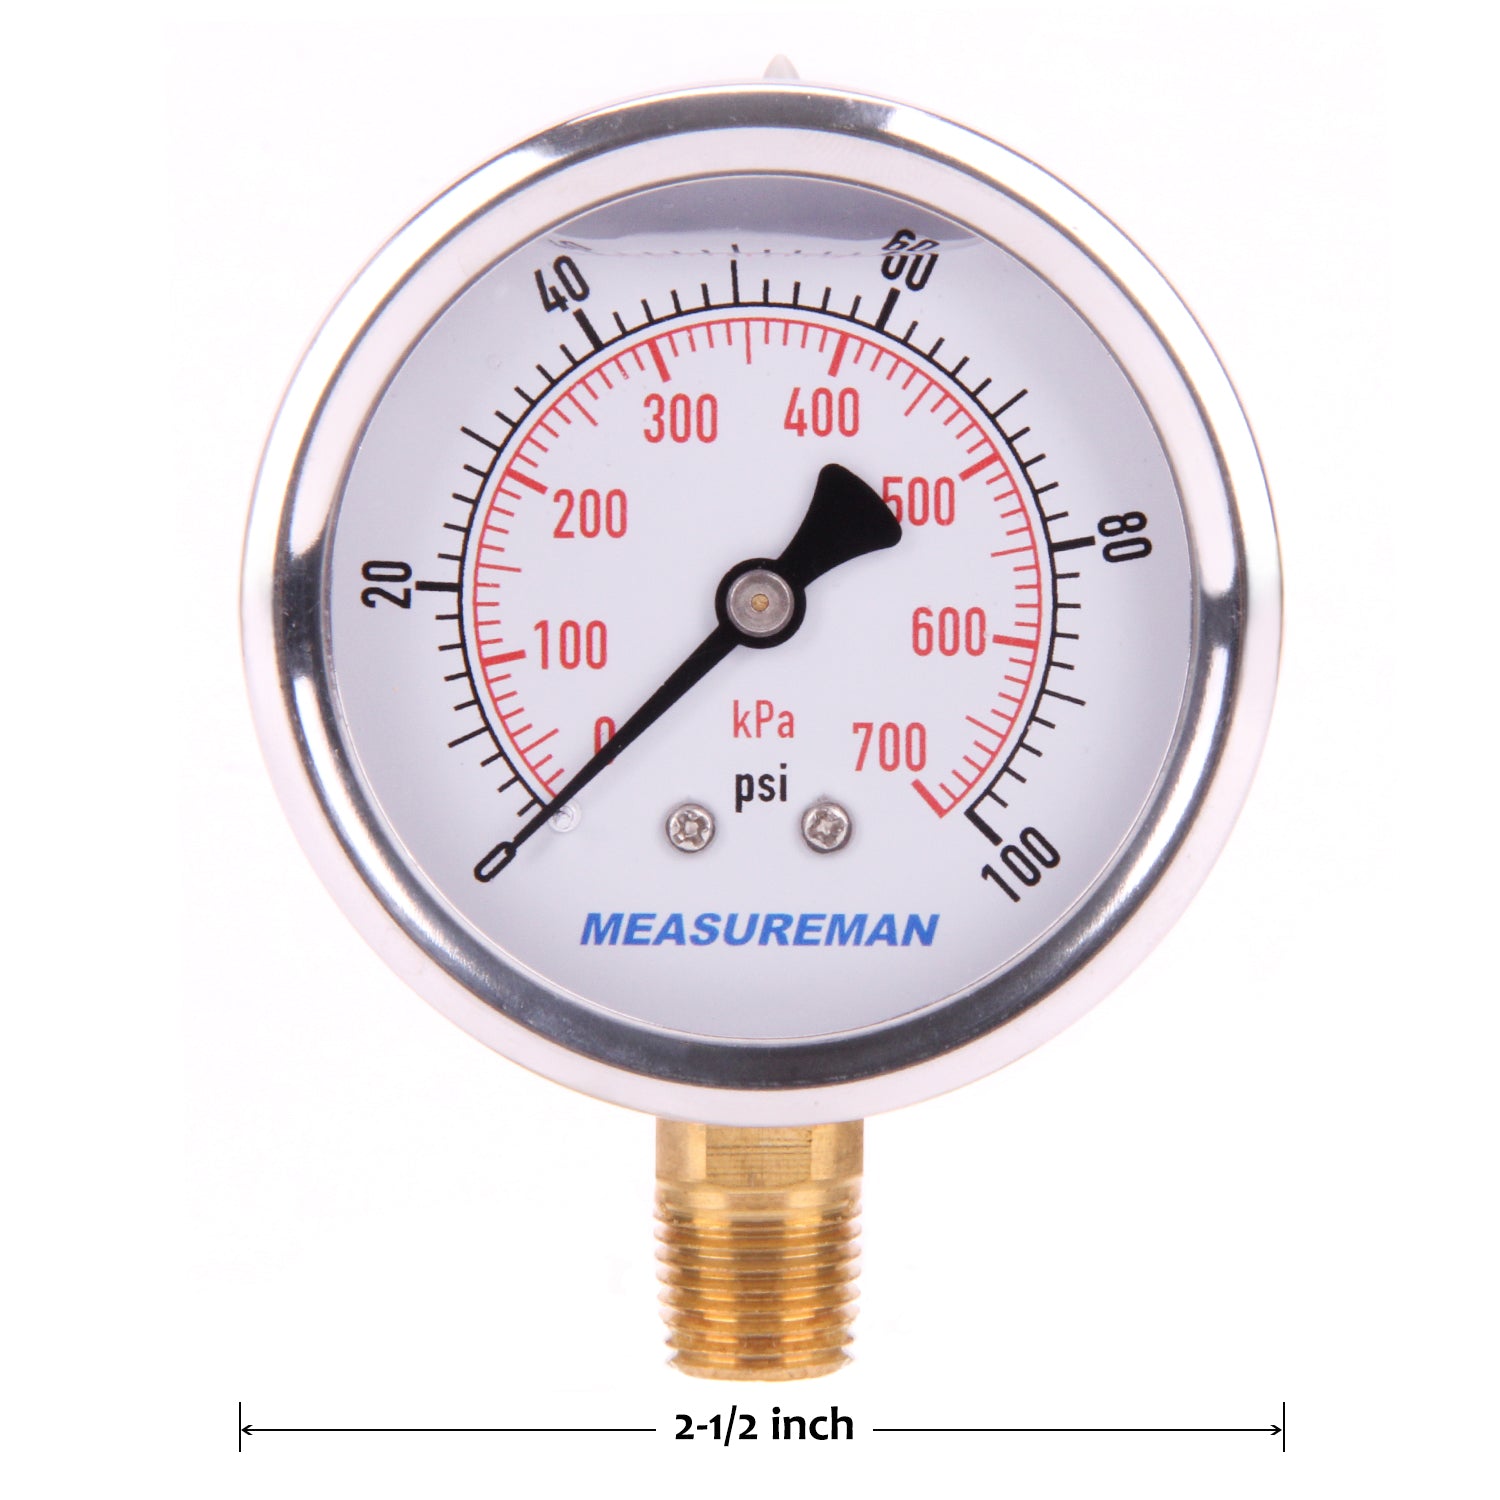 MEASUREMAN Refrigerator Thermometer 70mm Dial Size, Heavy Duty 304